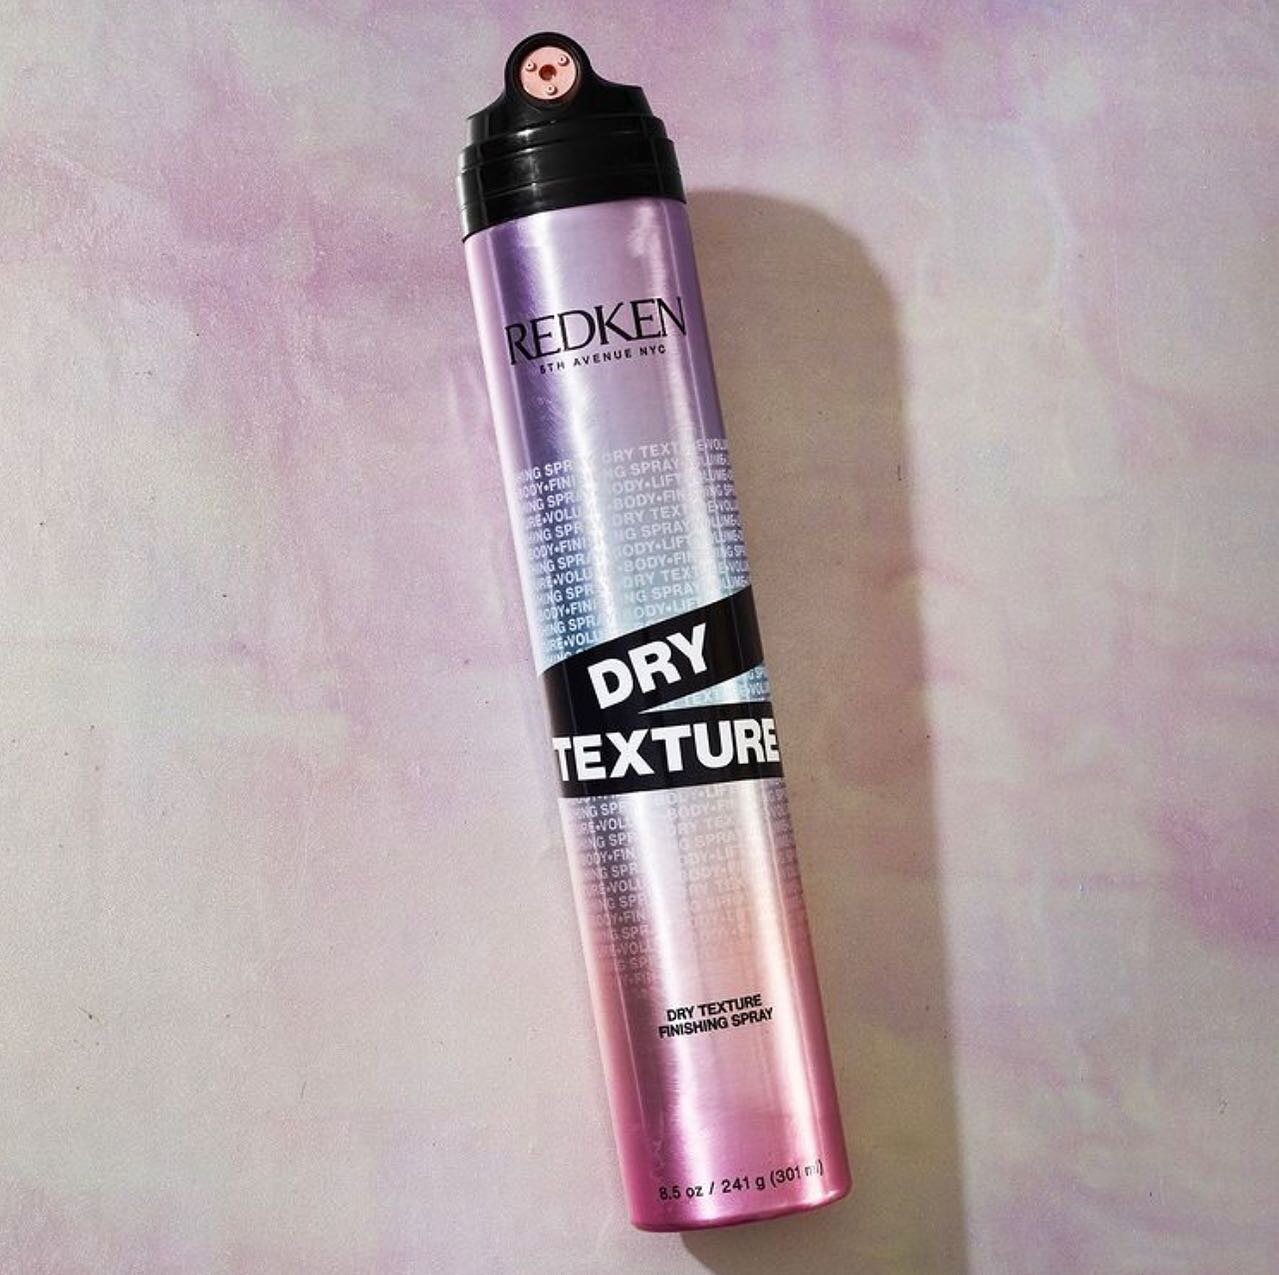 Looking for volume and instant texture? Well, look no further!
Formerly known as Triple Dry 15, Redken's Dry Texture Spray is recommended for all hair types!

💙Instant undone texture
💙Volume with a soft, weightless finish
💙Oil absorptions
💙No bui